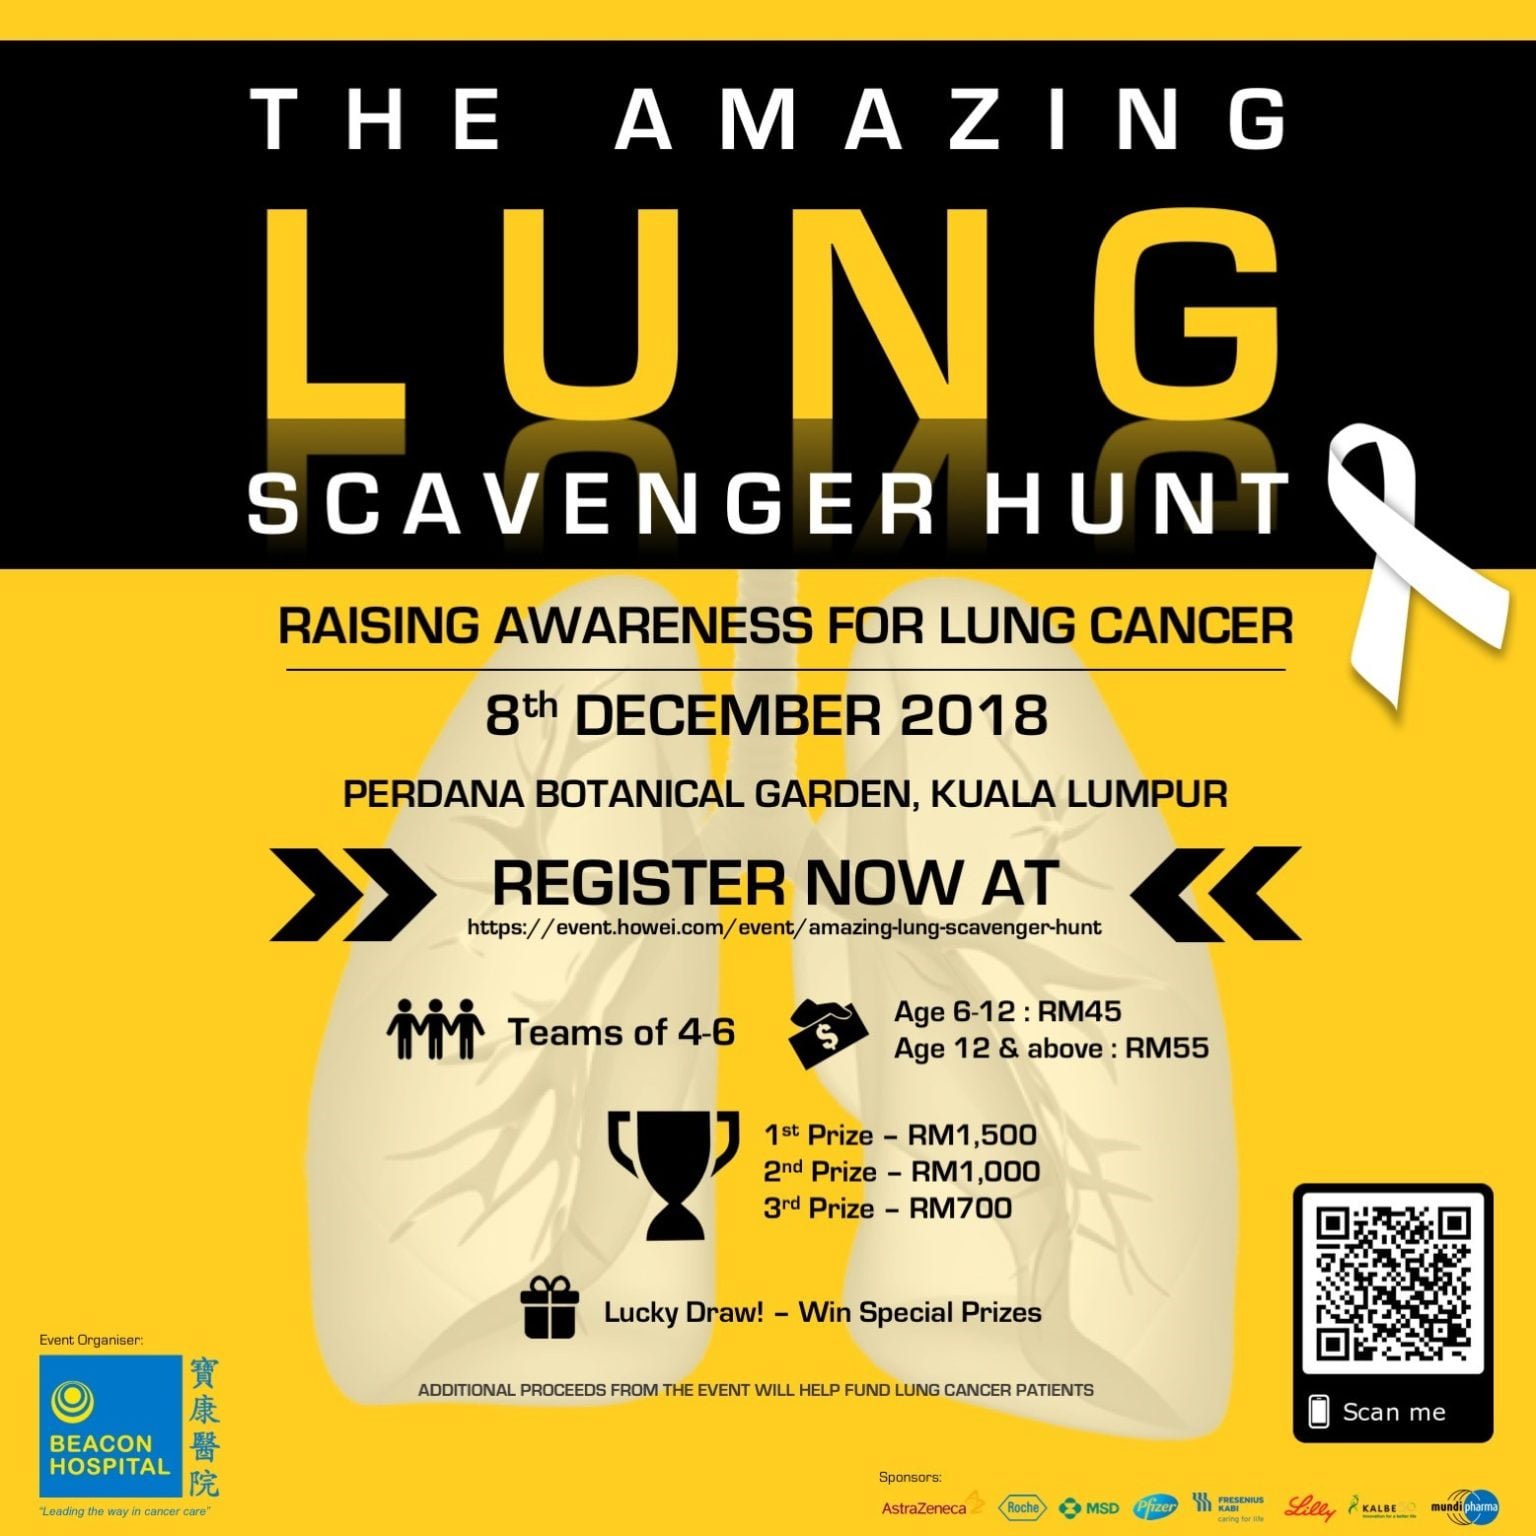 The Amazing Lung Scavenger Hunt